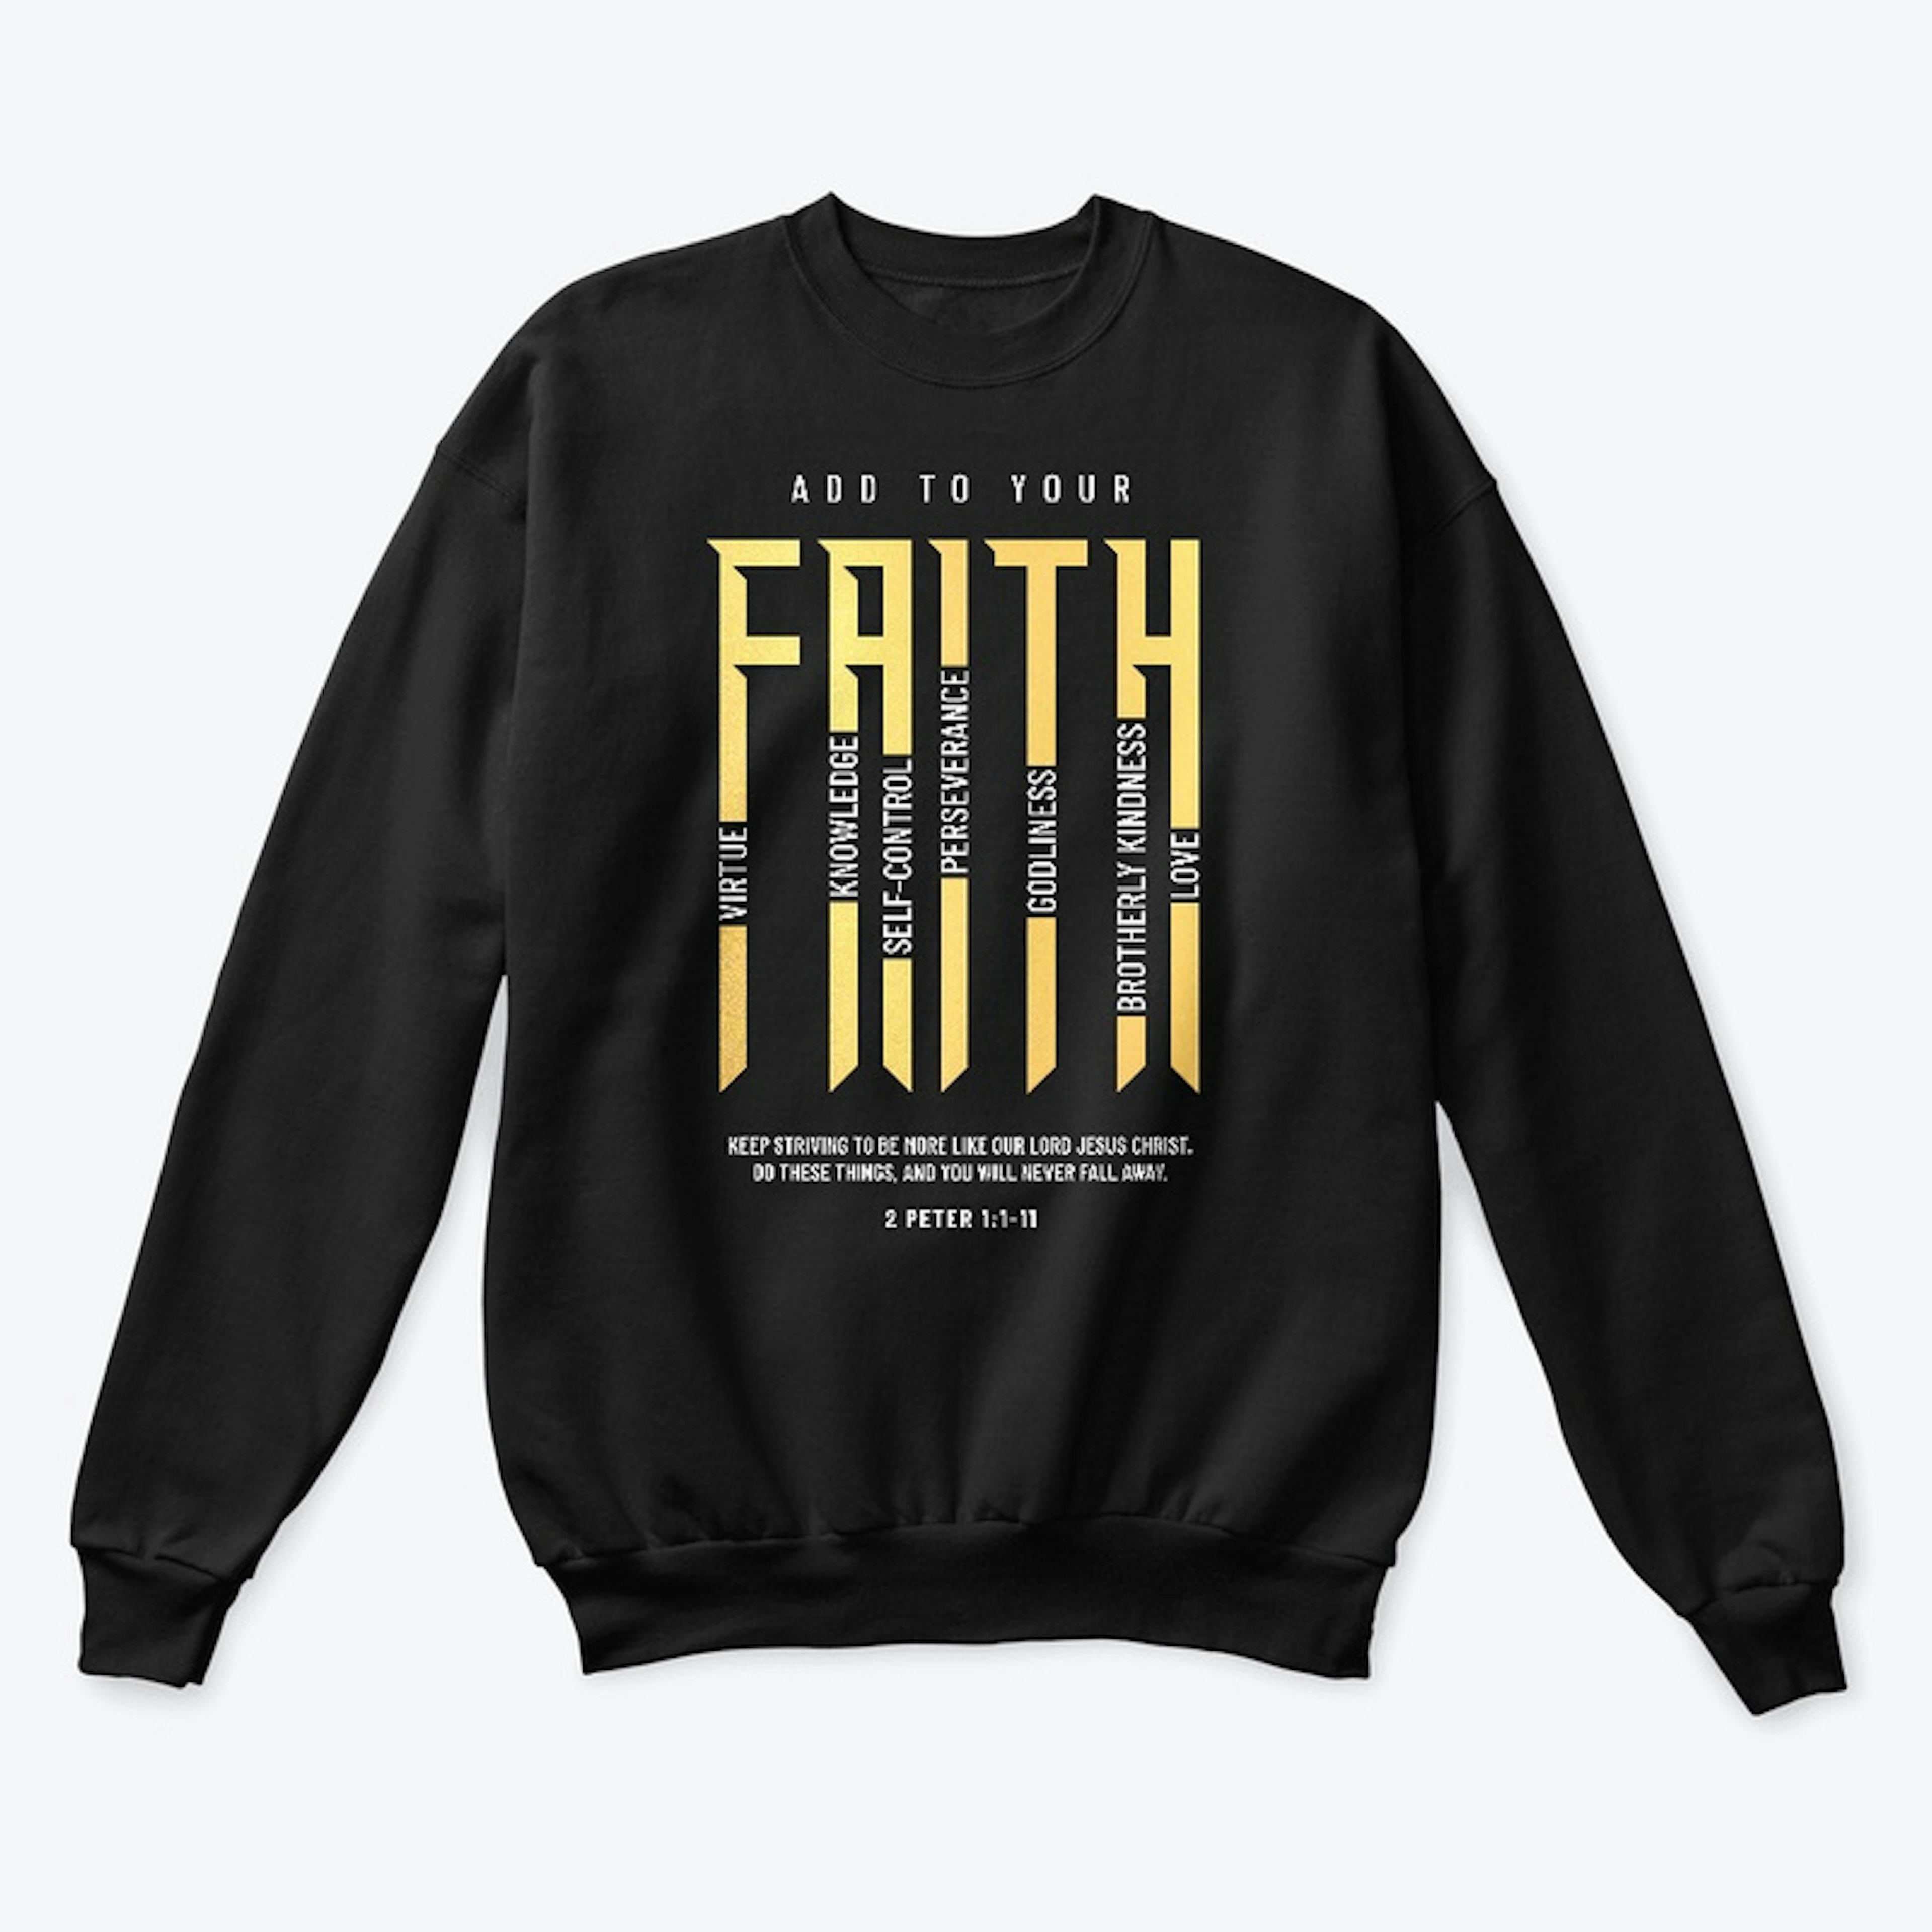 Add To Your Faith (Golden version)